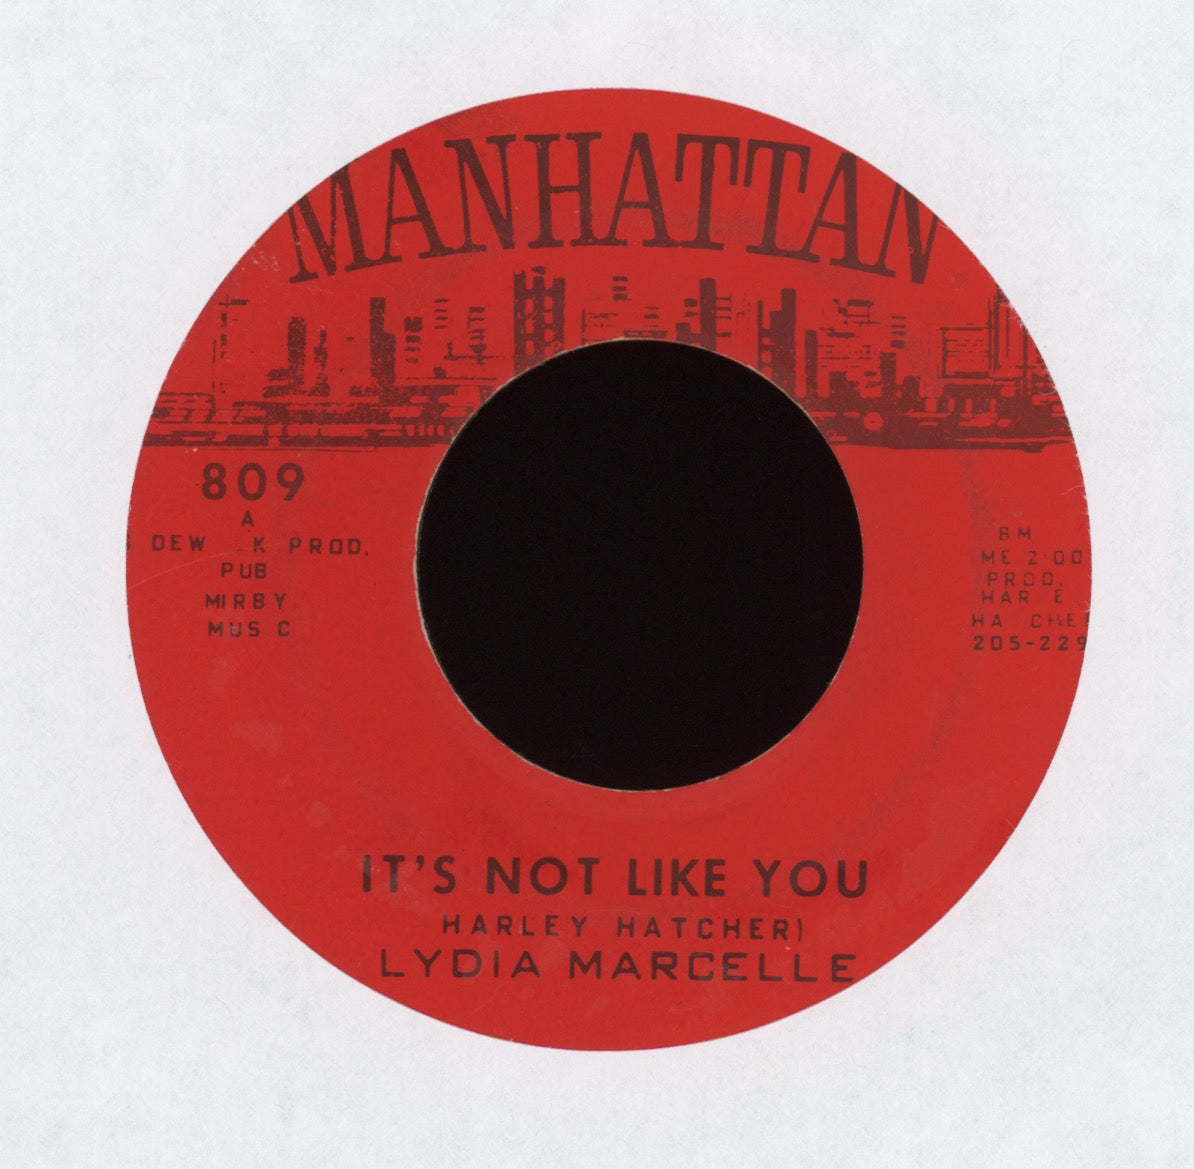 Lydia Marcelle - It's Not Like You on Manhattan Northern Soul 45